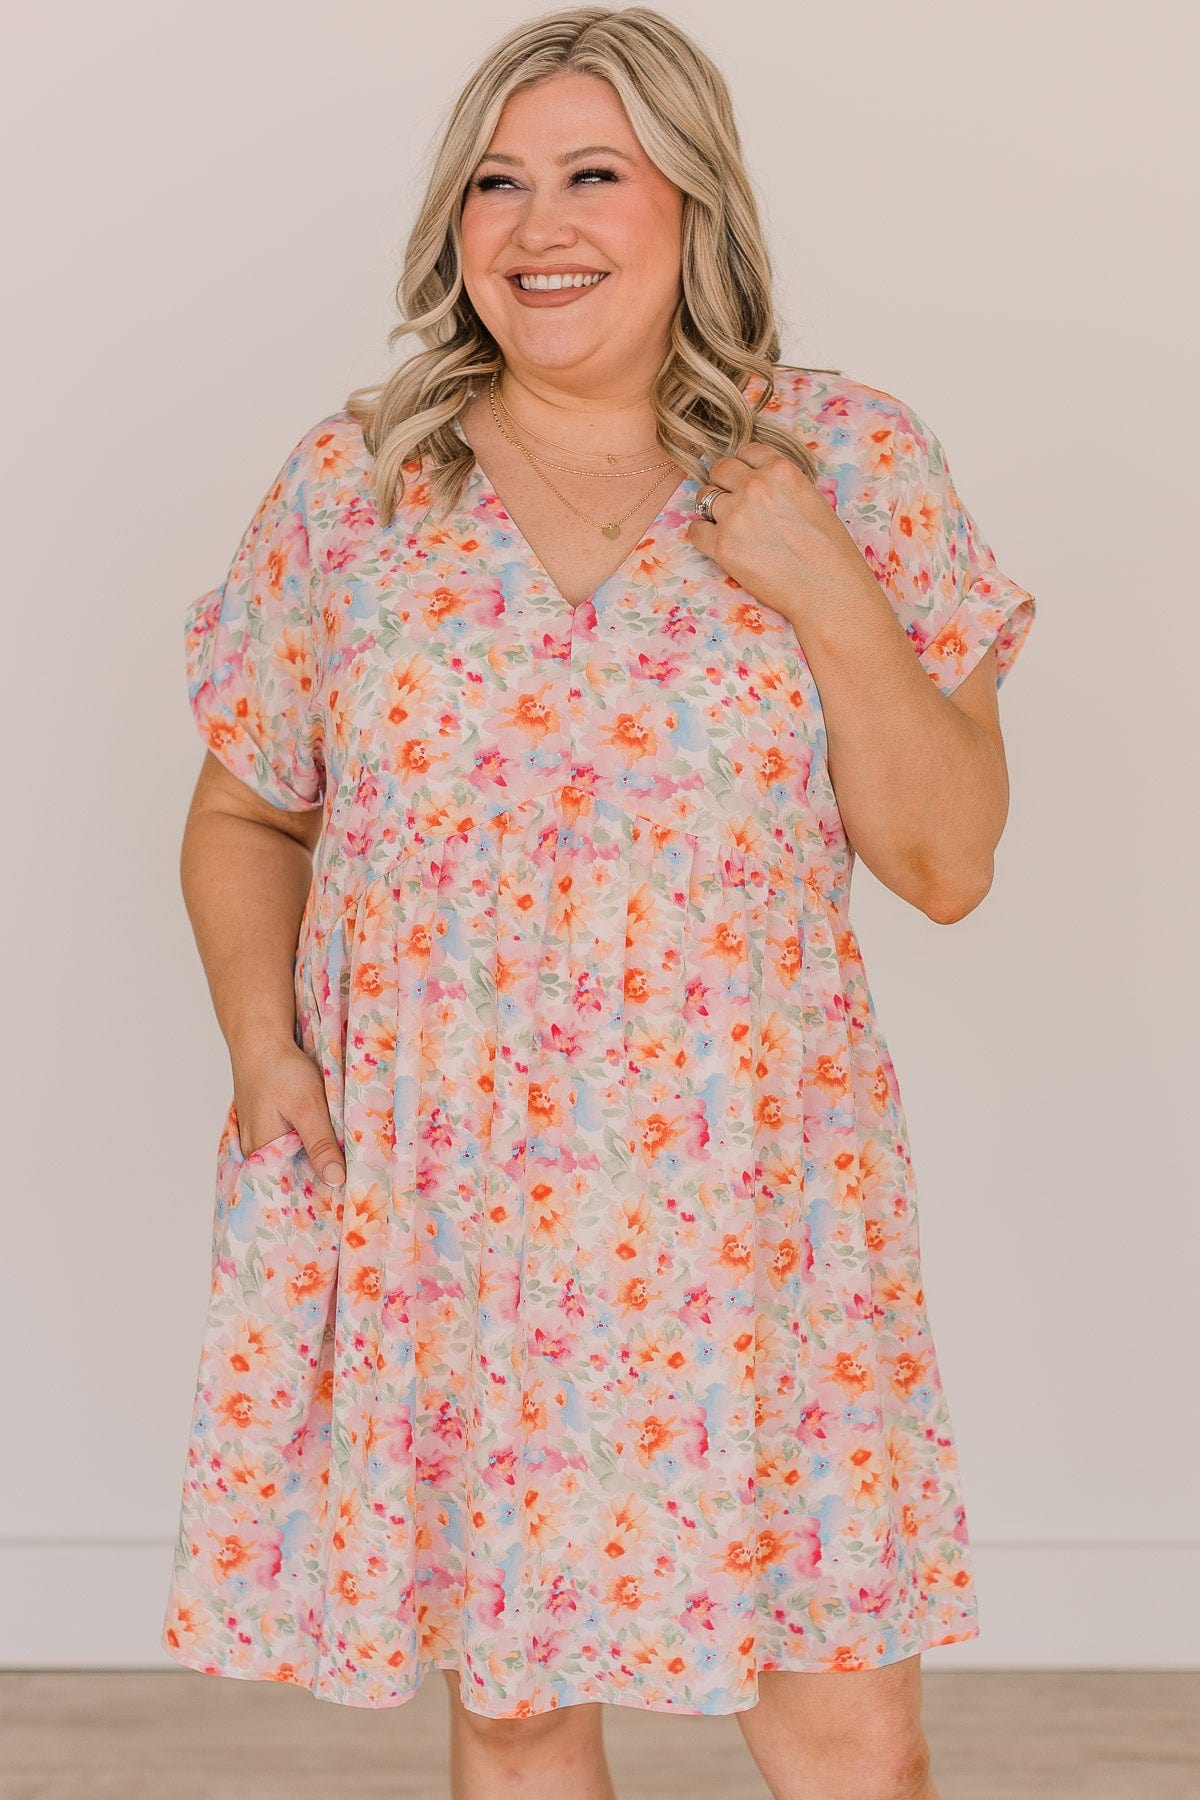 Top Of My List Floral Babydoll Dress- Ivory